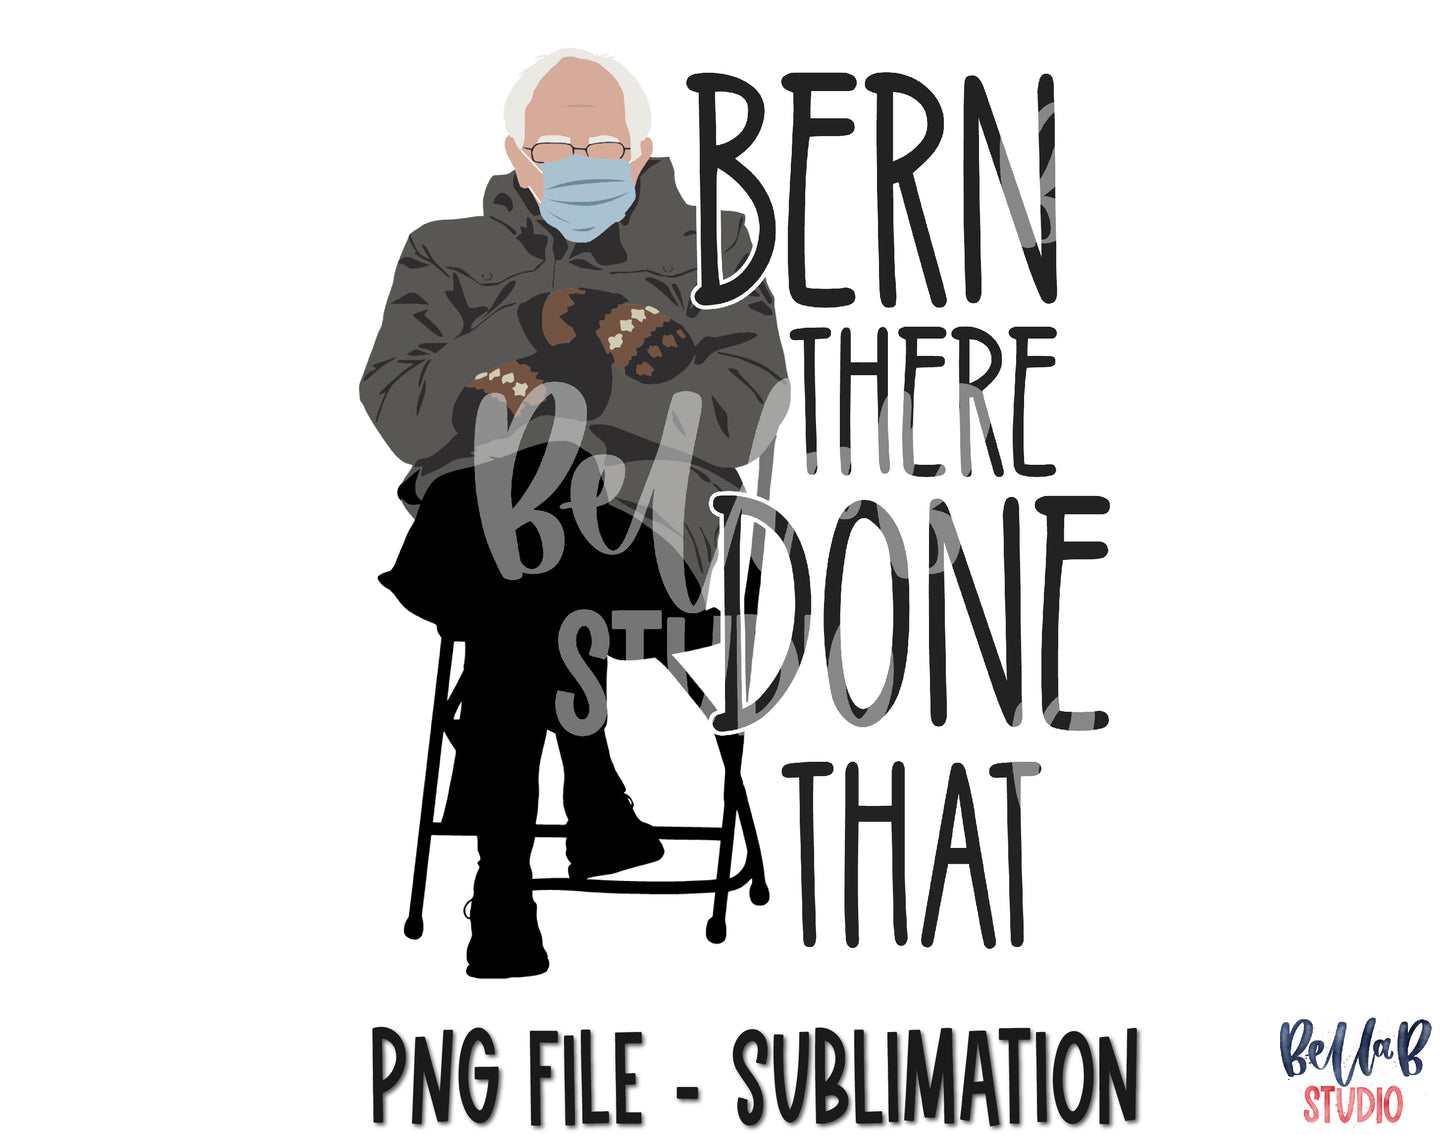 Bernie Sanders Sublimation Design - Bern There Done That